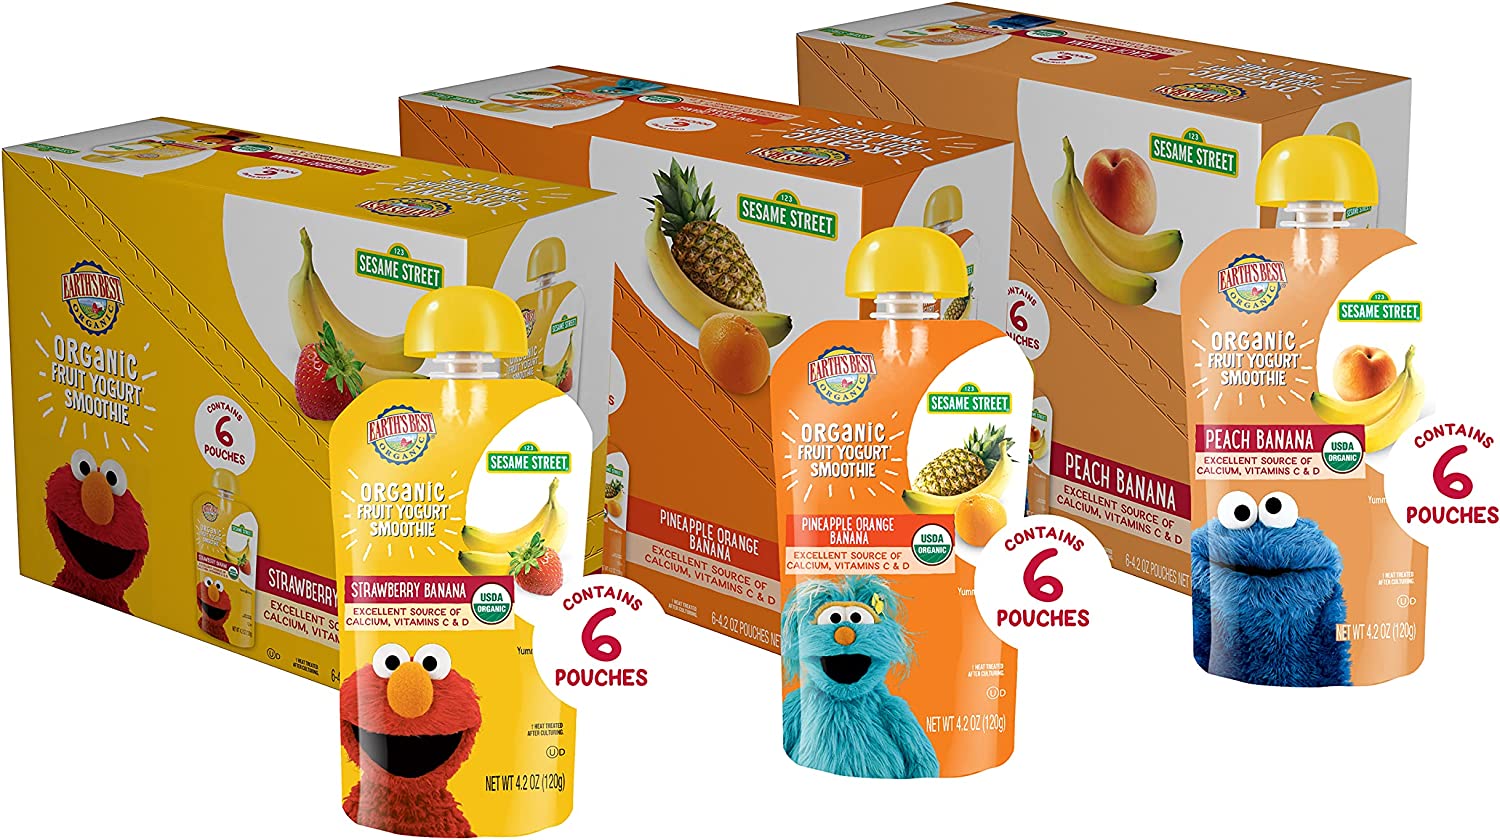 Earth’s Best Organic Kids Snacks, Sesame Street Toddler Snacks, Organic Fruit Yogurt Smoothie for Toddlers 2 Years and Older, Banana Smoothie Variety Pack, 4.2 oz Resealable Pouch (Pack of 18)